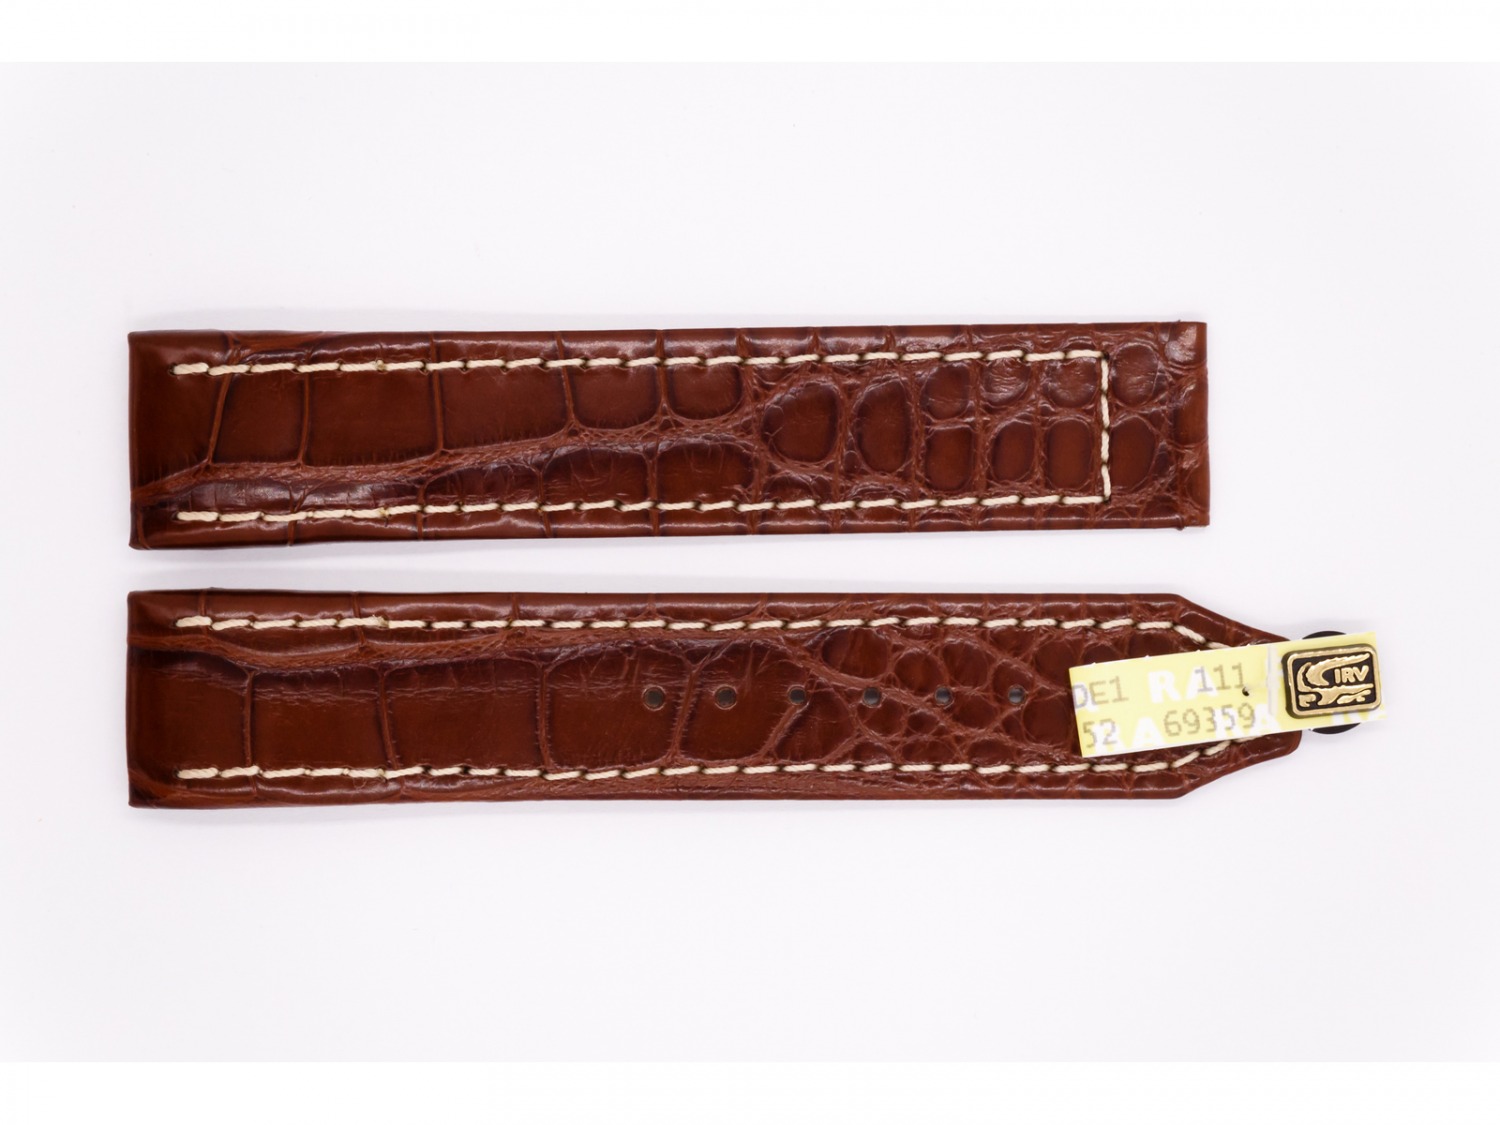 Alligator Mississipiensis Leather Maurice Lacroix strap, glossy brown